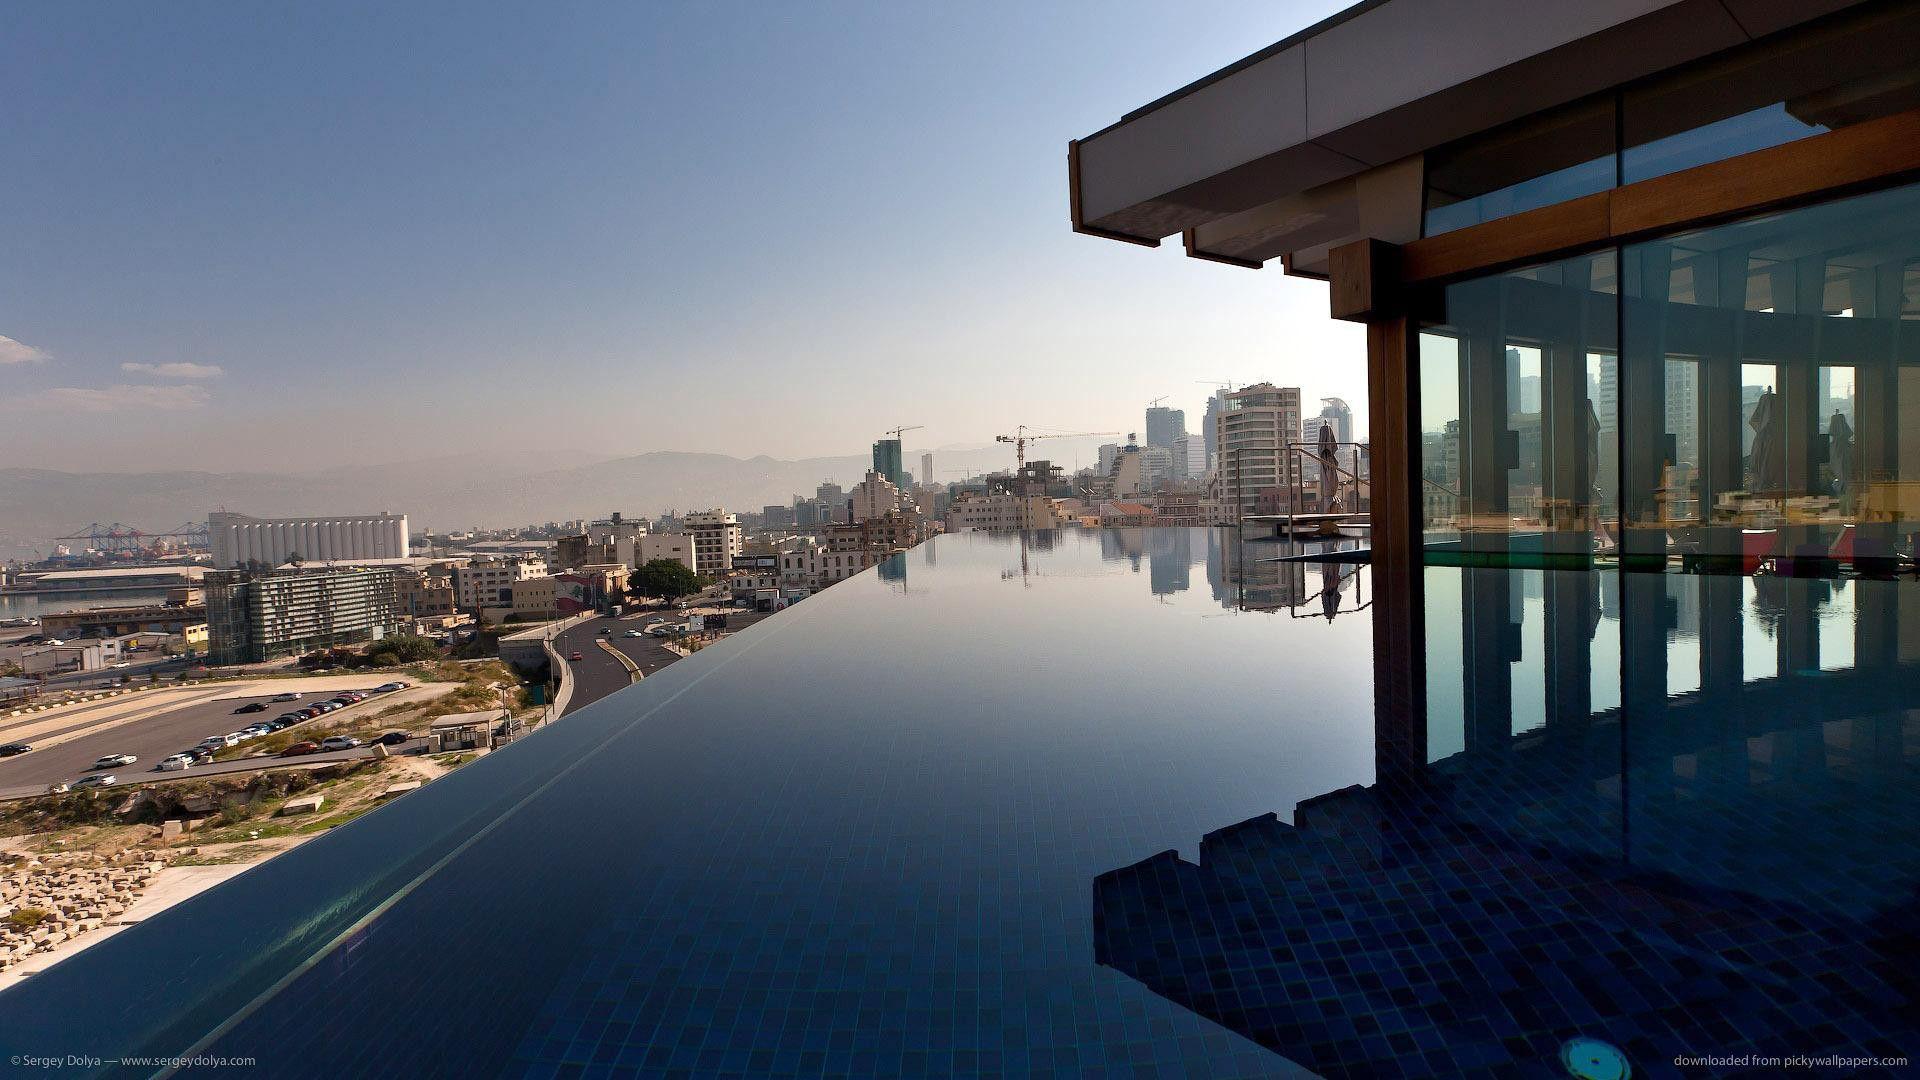 Download 1920x1080 Infinity Pool On A Beirut Roof wallpaper